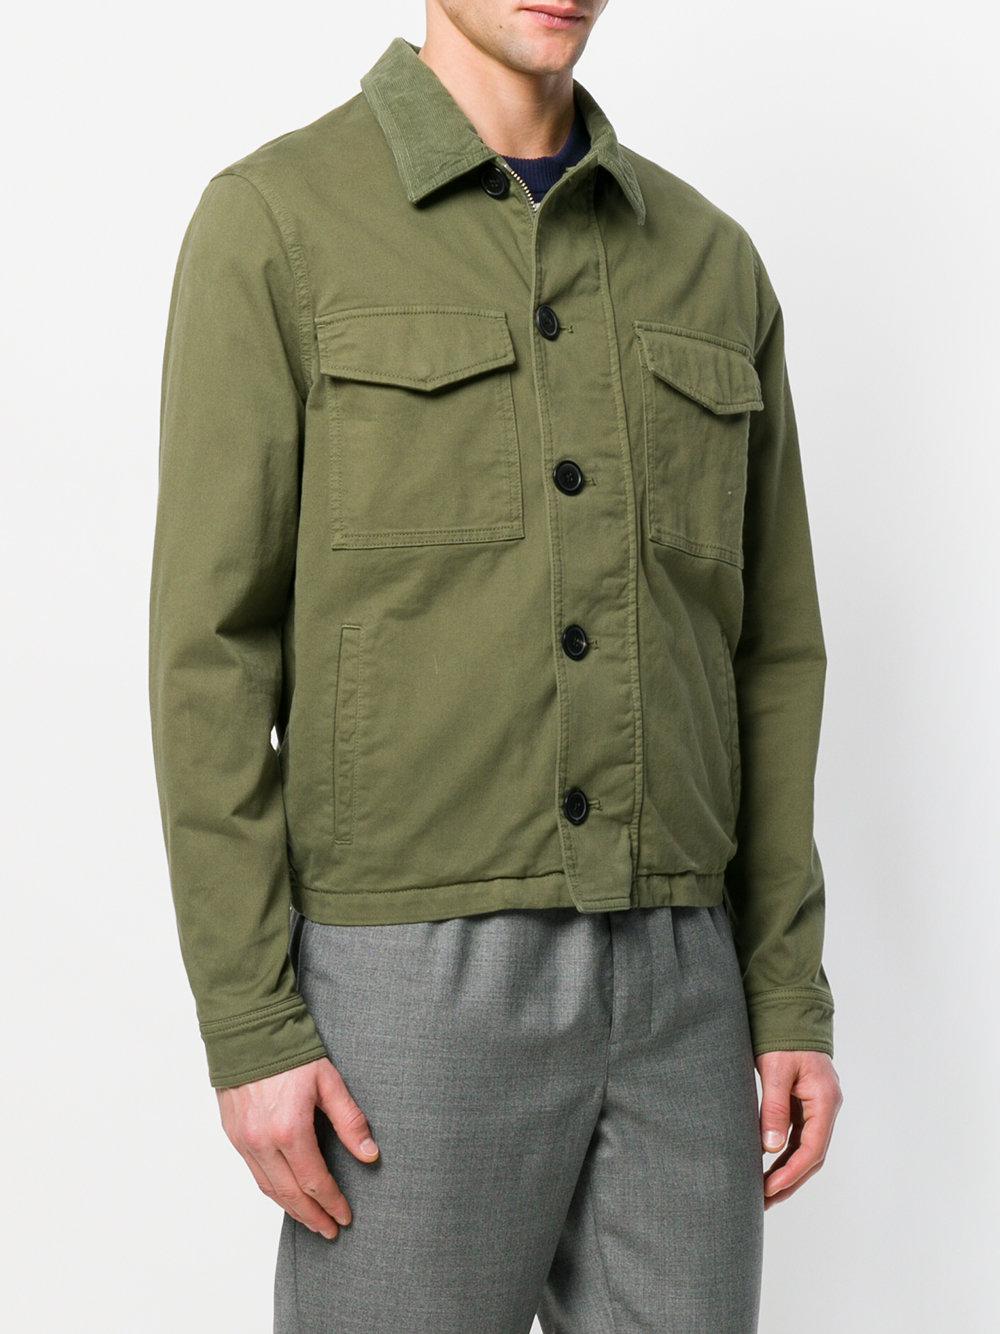 AMI Synthetic Casual Jacket in Green for Men - Lyst